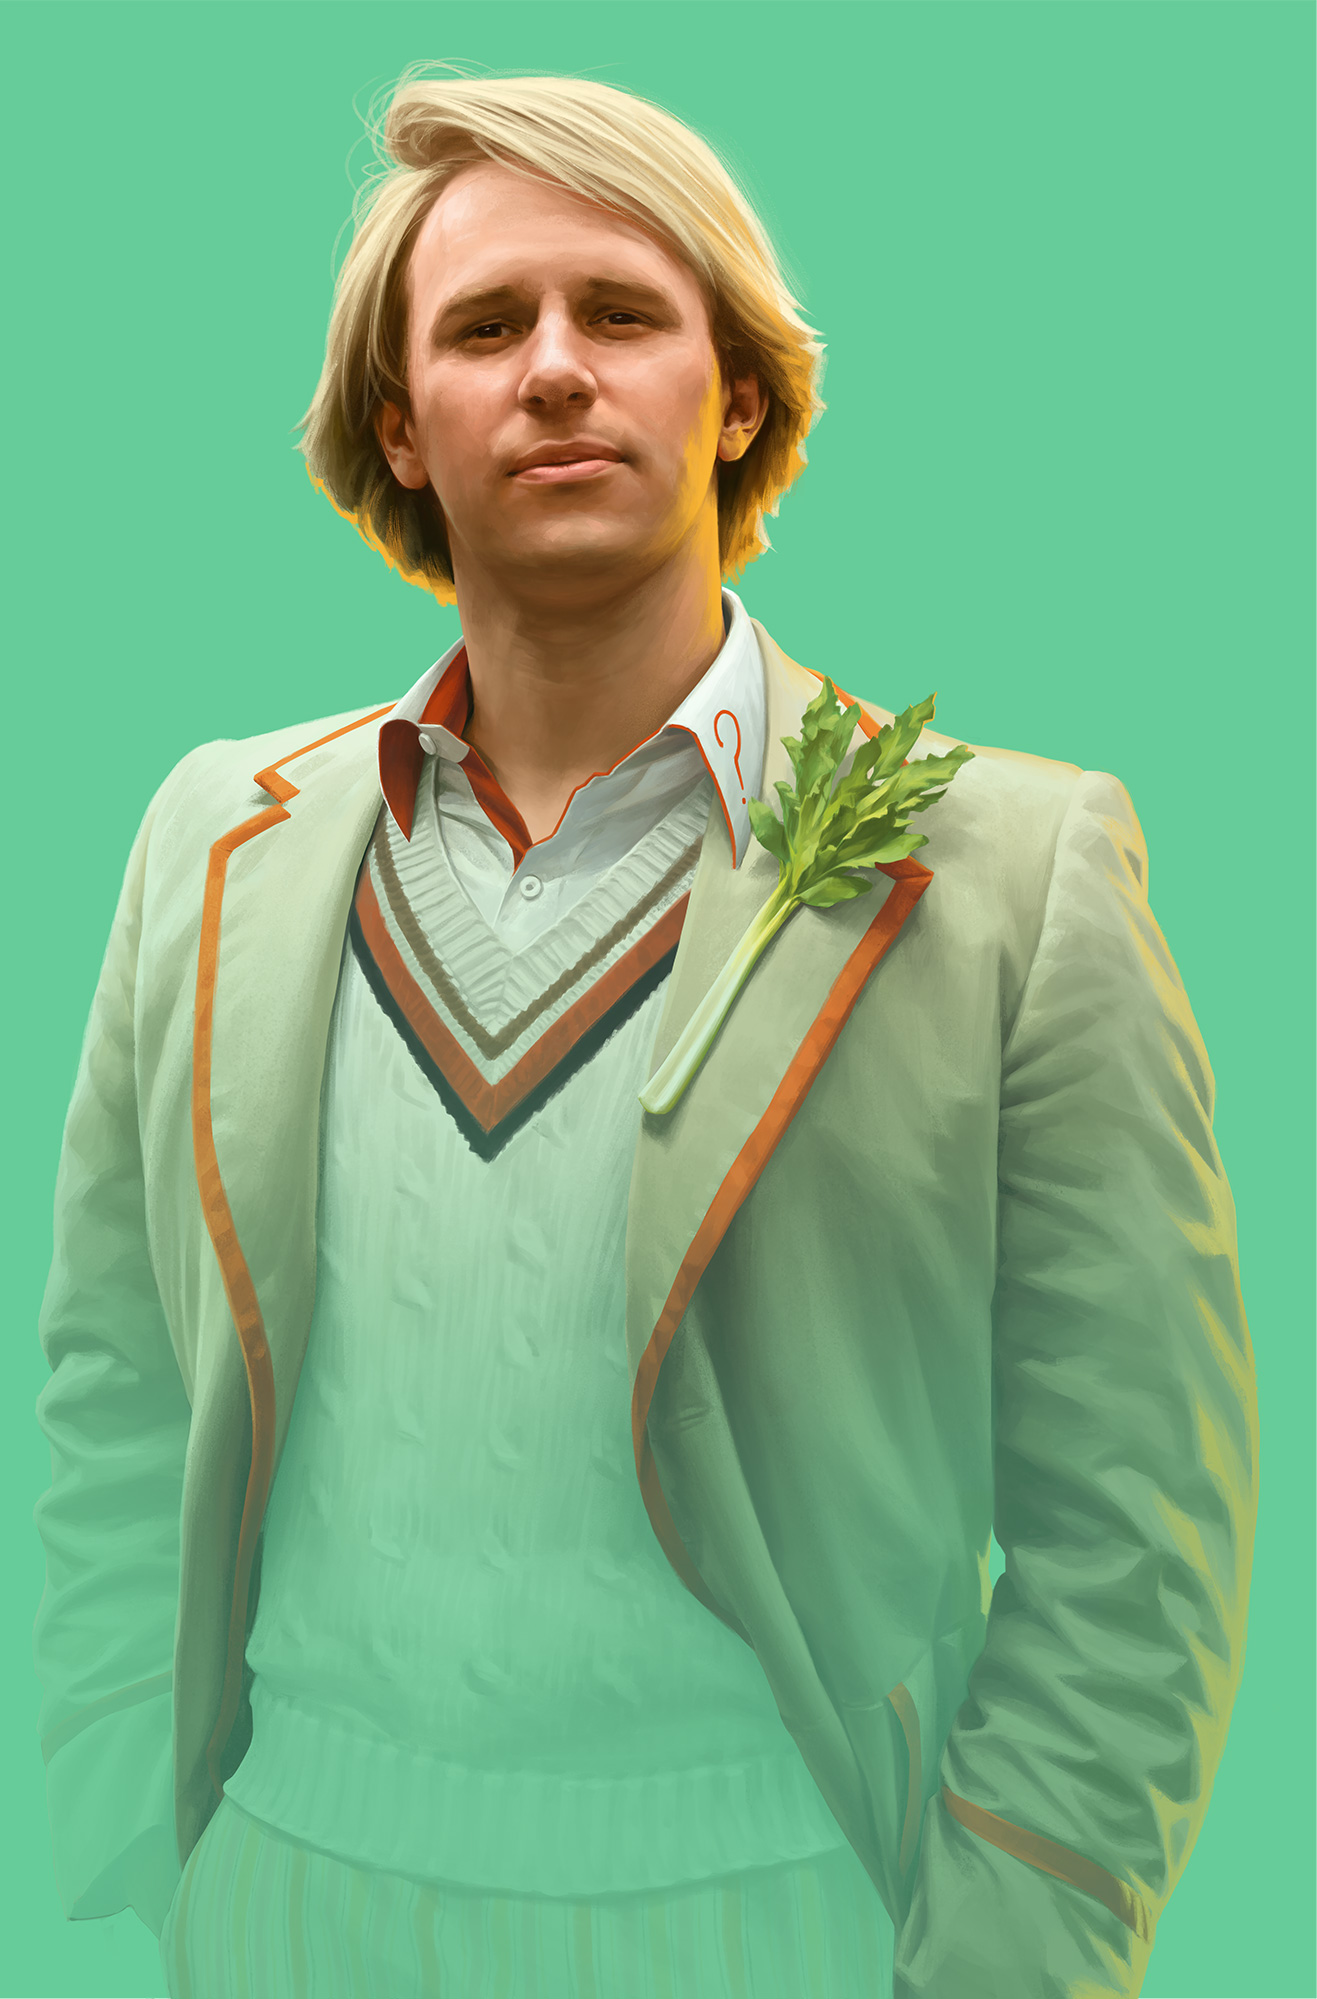 JEREMY ENECIO | BBC RELEASES NEW CHARACTER PORTRAITS OF THE DOCTORS